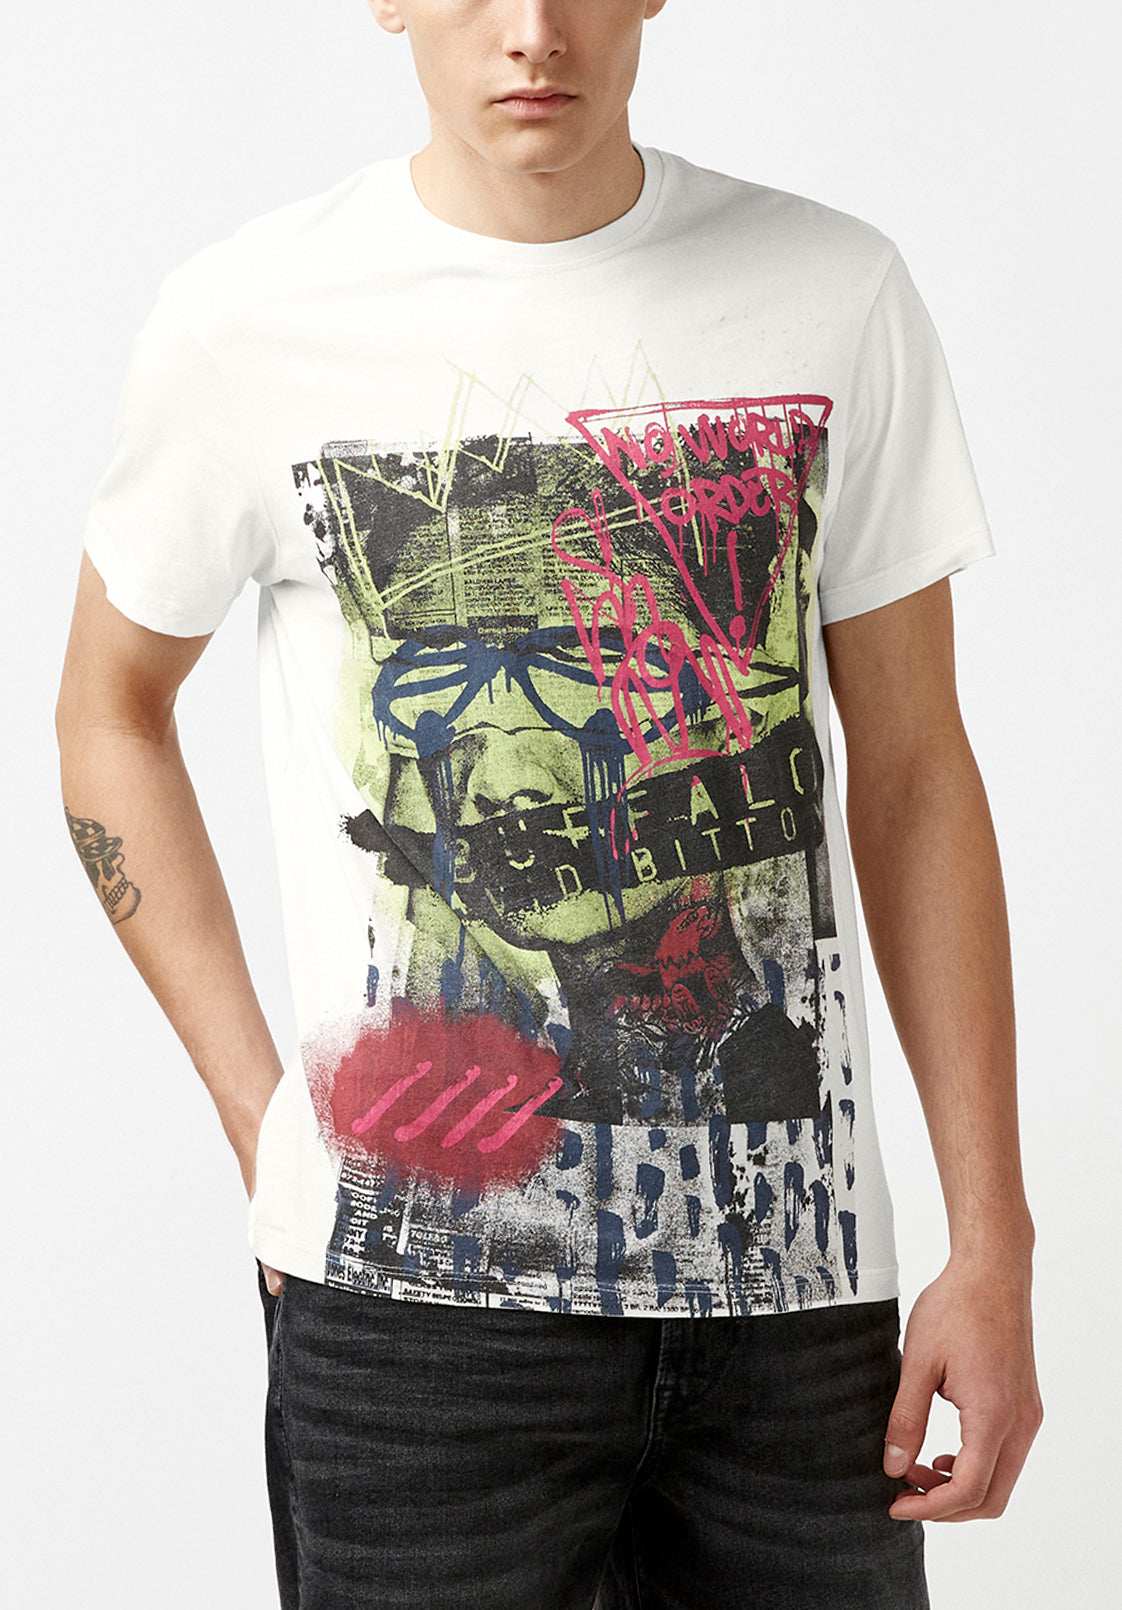 Tofy Collage Spray Paint Graphic T-Shirt - BM23947